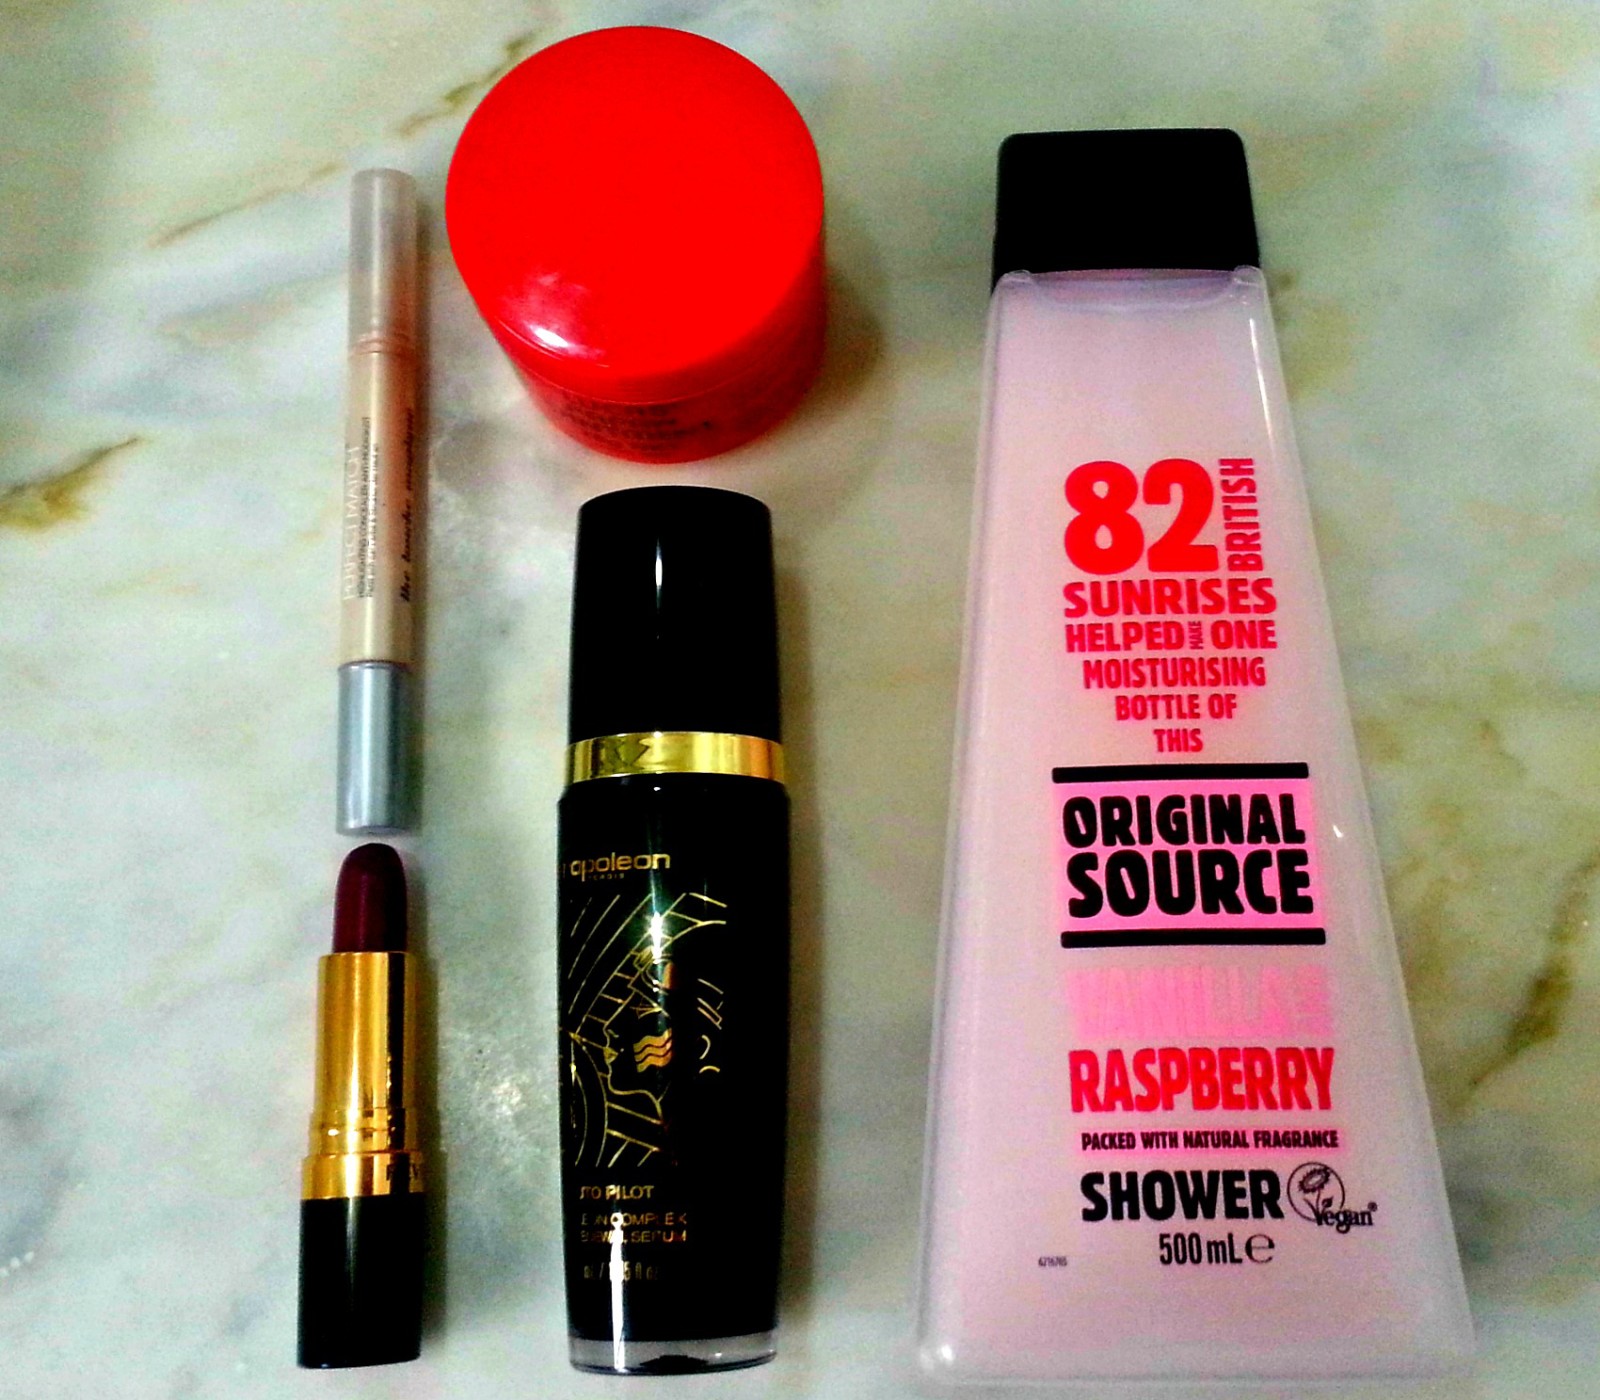 5 Favourite Things for February: Beauty Review